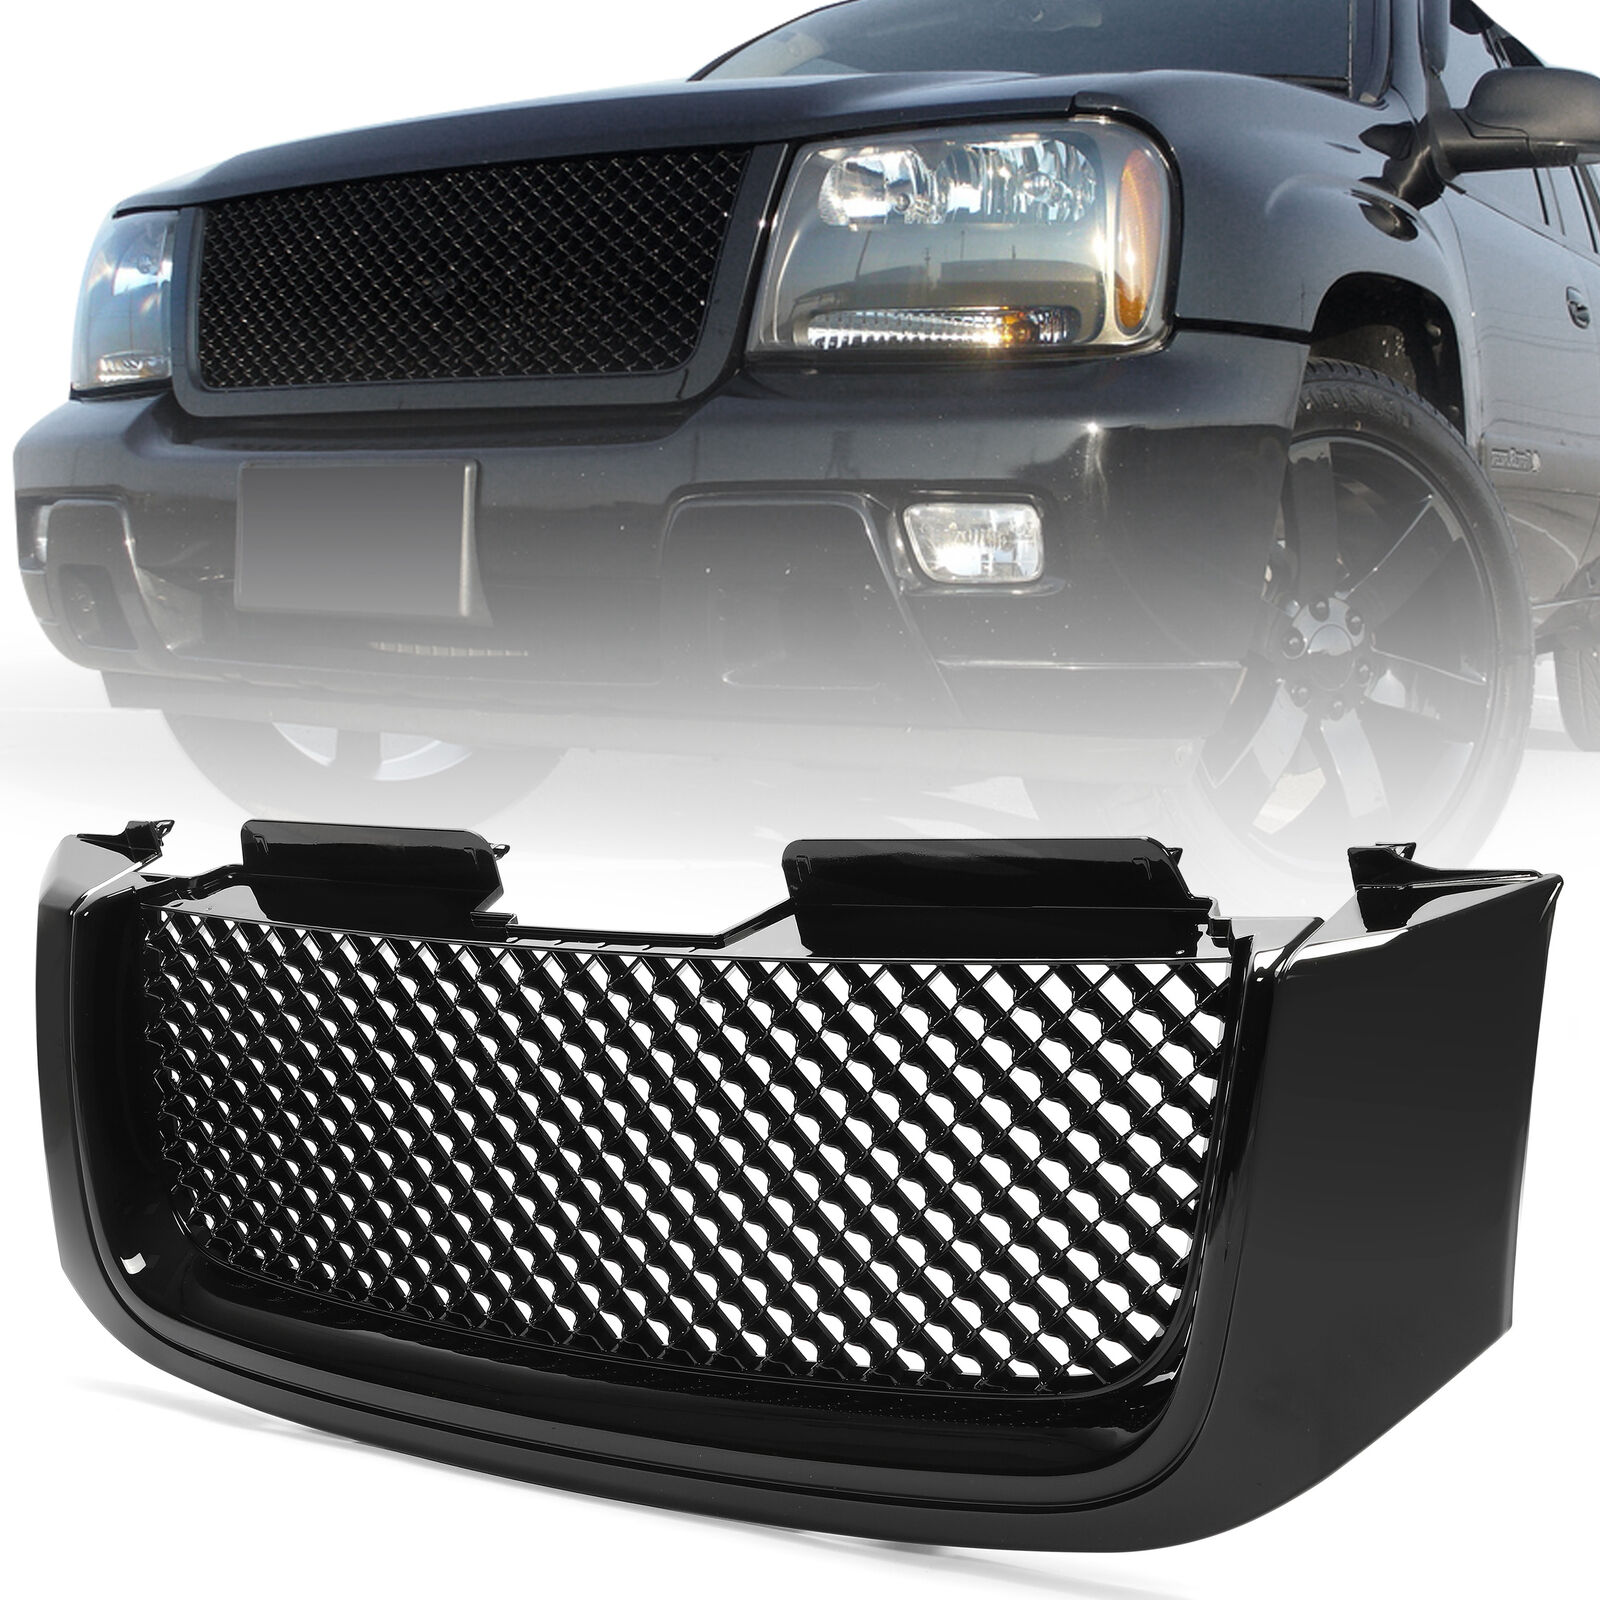 GLOSS BLACK FRONT UPPER HOOD GRILLE For 2002-2009 GMC ENVOY HONEYCOMB MESH GRILL